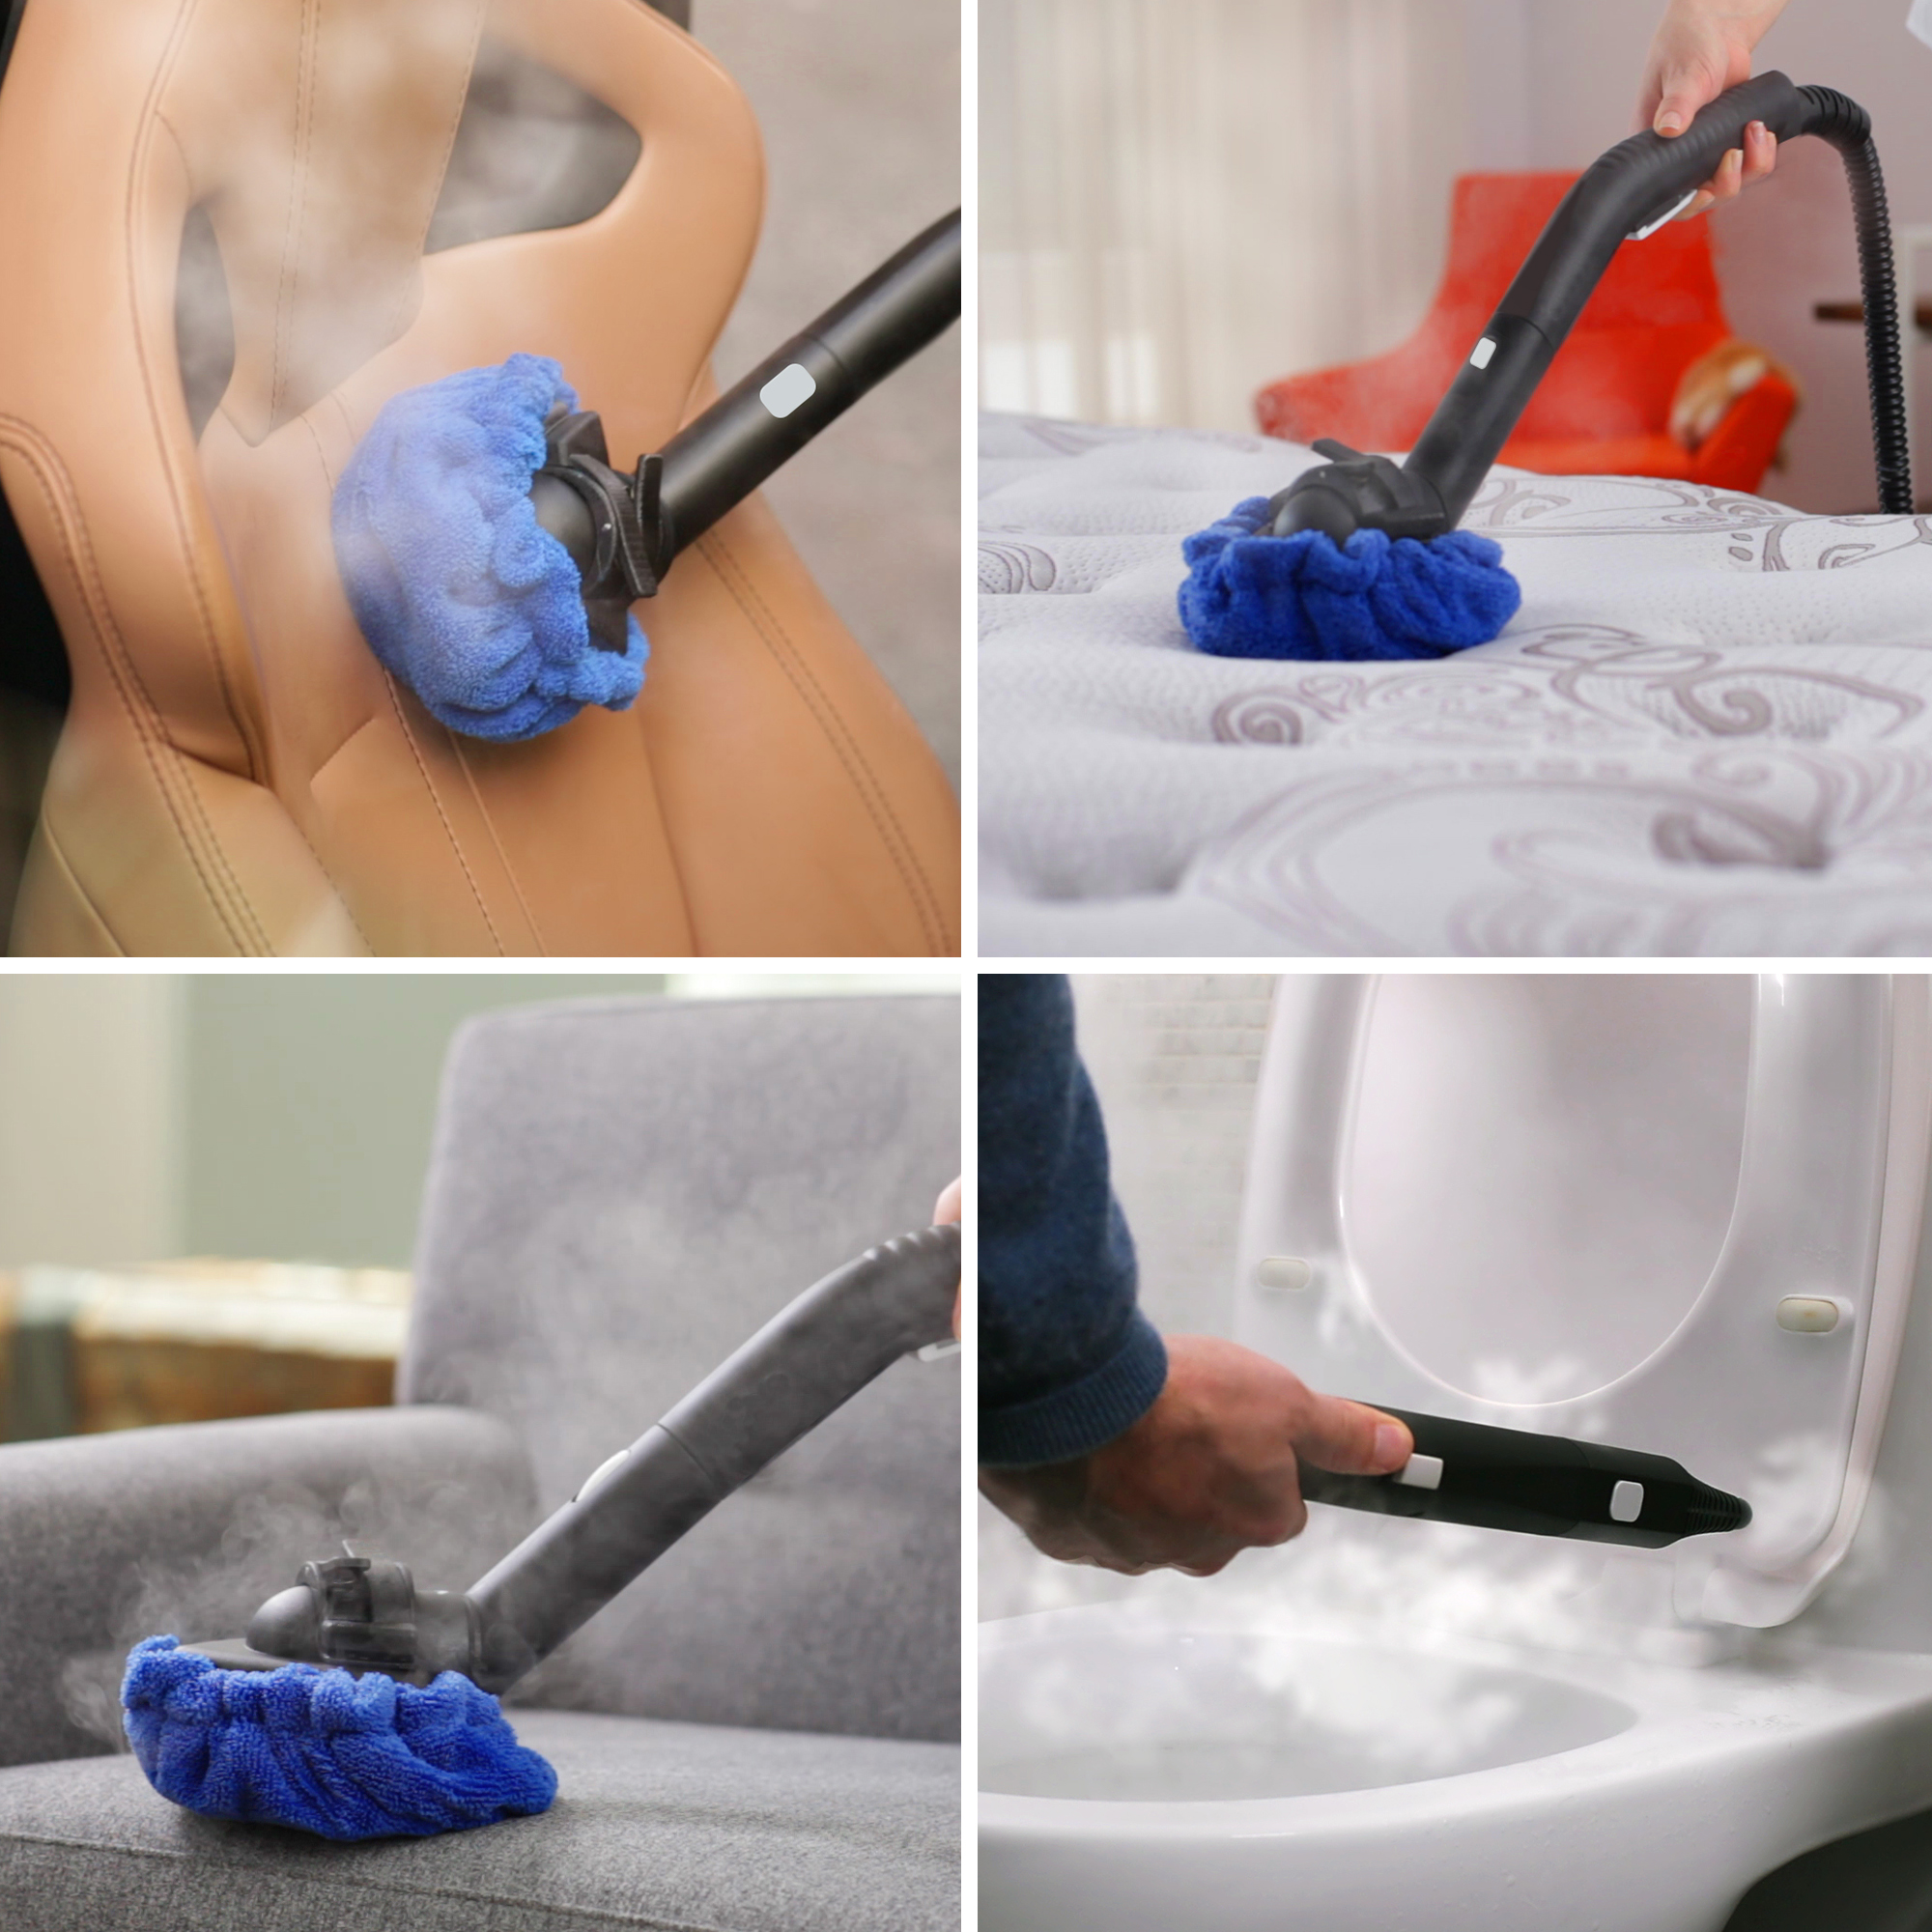 Dupray Neat Steam Cleaner Powerful Multipurpose Portable Heavy Duty Steamer for Floors, Cars, Tiles, Grout Cleaning. Chemical Free, Disinfection, for Home Use and More. Kills 99.99%* of Bacteria. - image 4 of 14